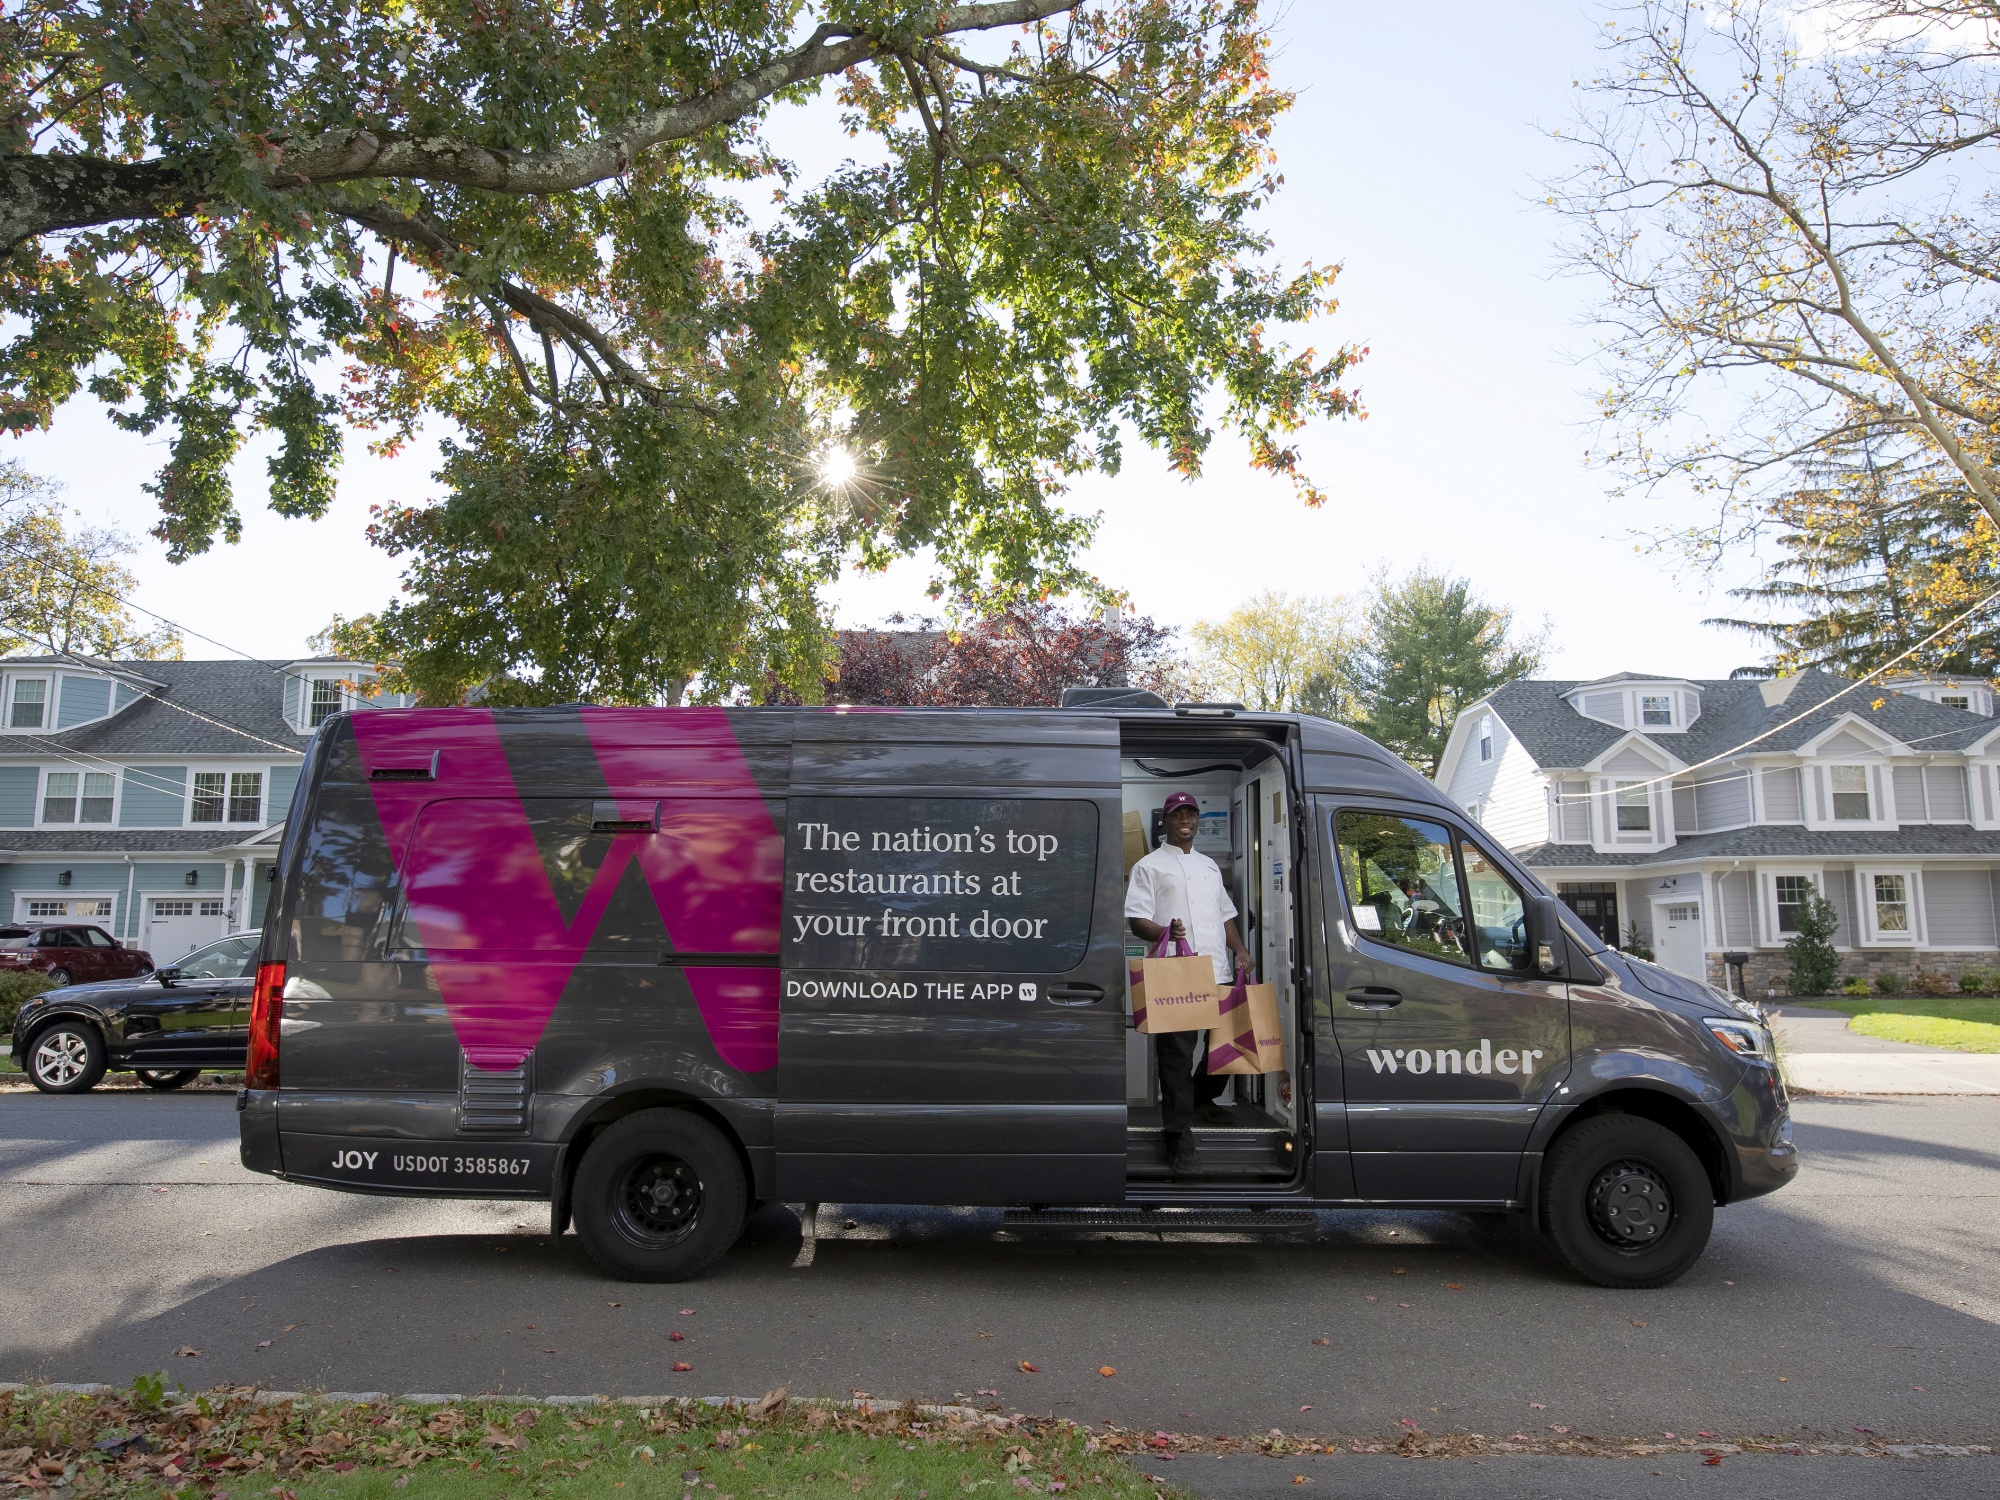 Make Room, Food Trucks: Mobile Fashion Stores Have Hit The Streets